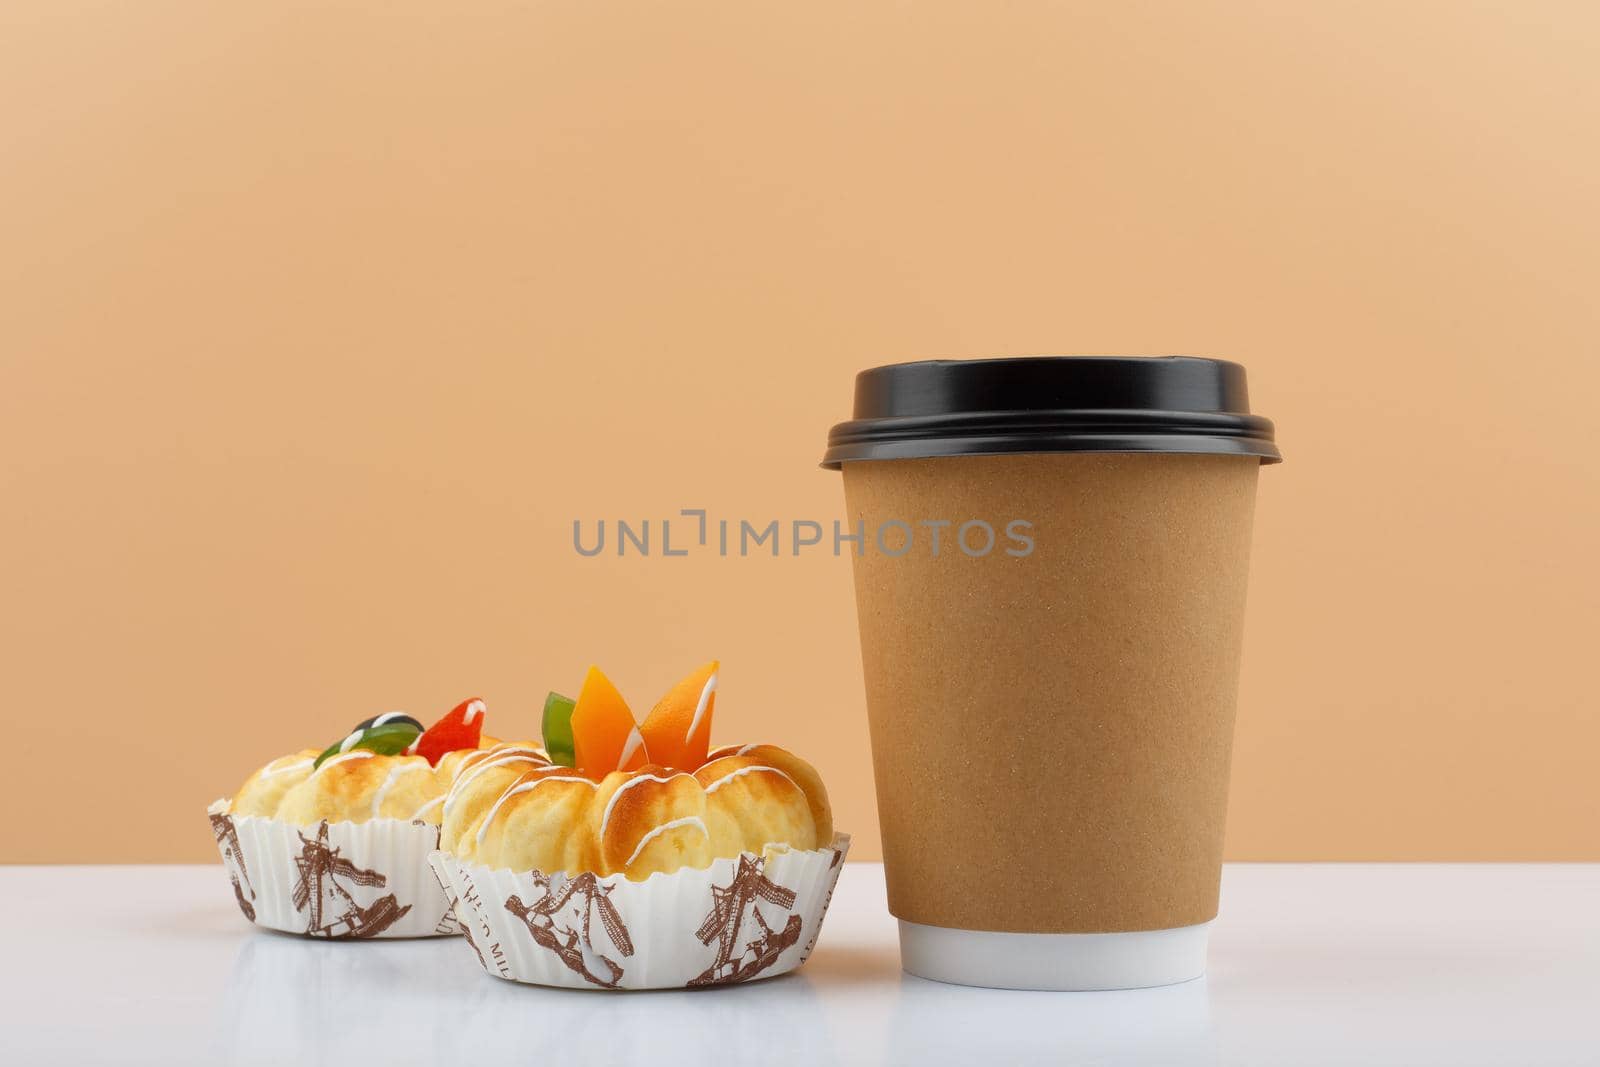 Coffee or tea in cardboard cup with pastry against beige background. Concept of hot drinks and take away food